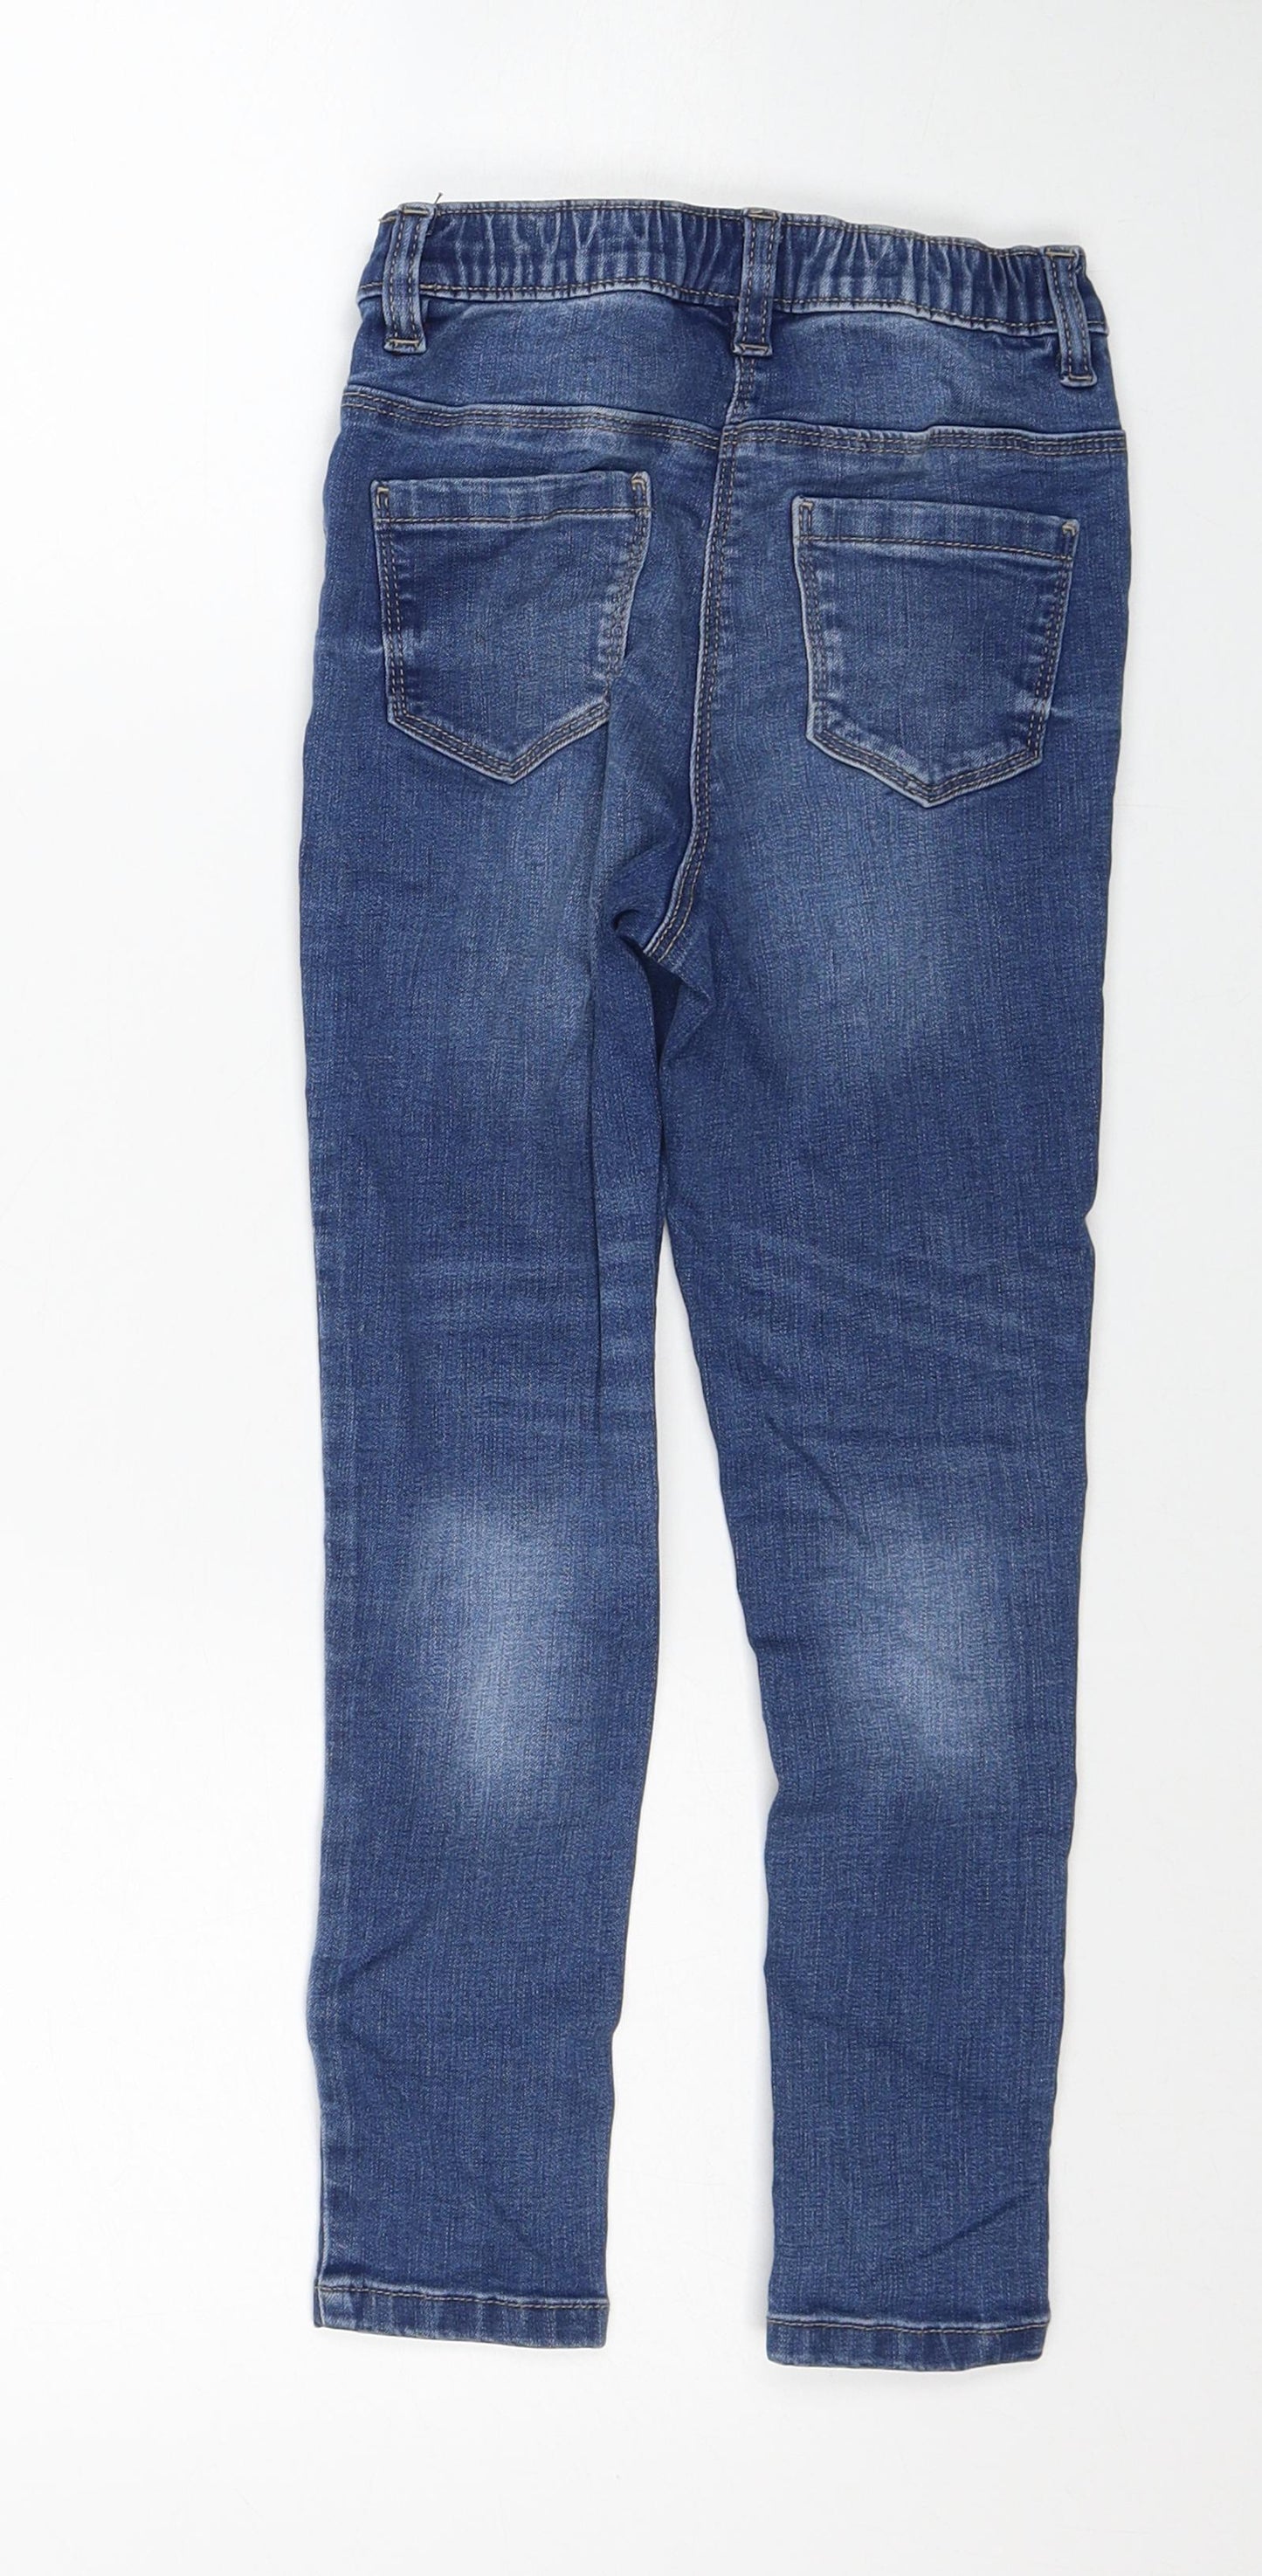 NEXT Girls Blue Cotton Skinny Jeans Size 7 Years Regular Pullover